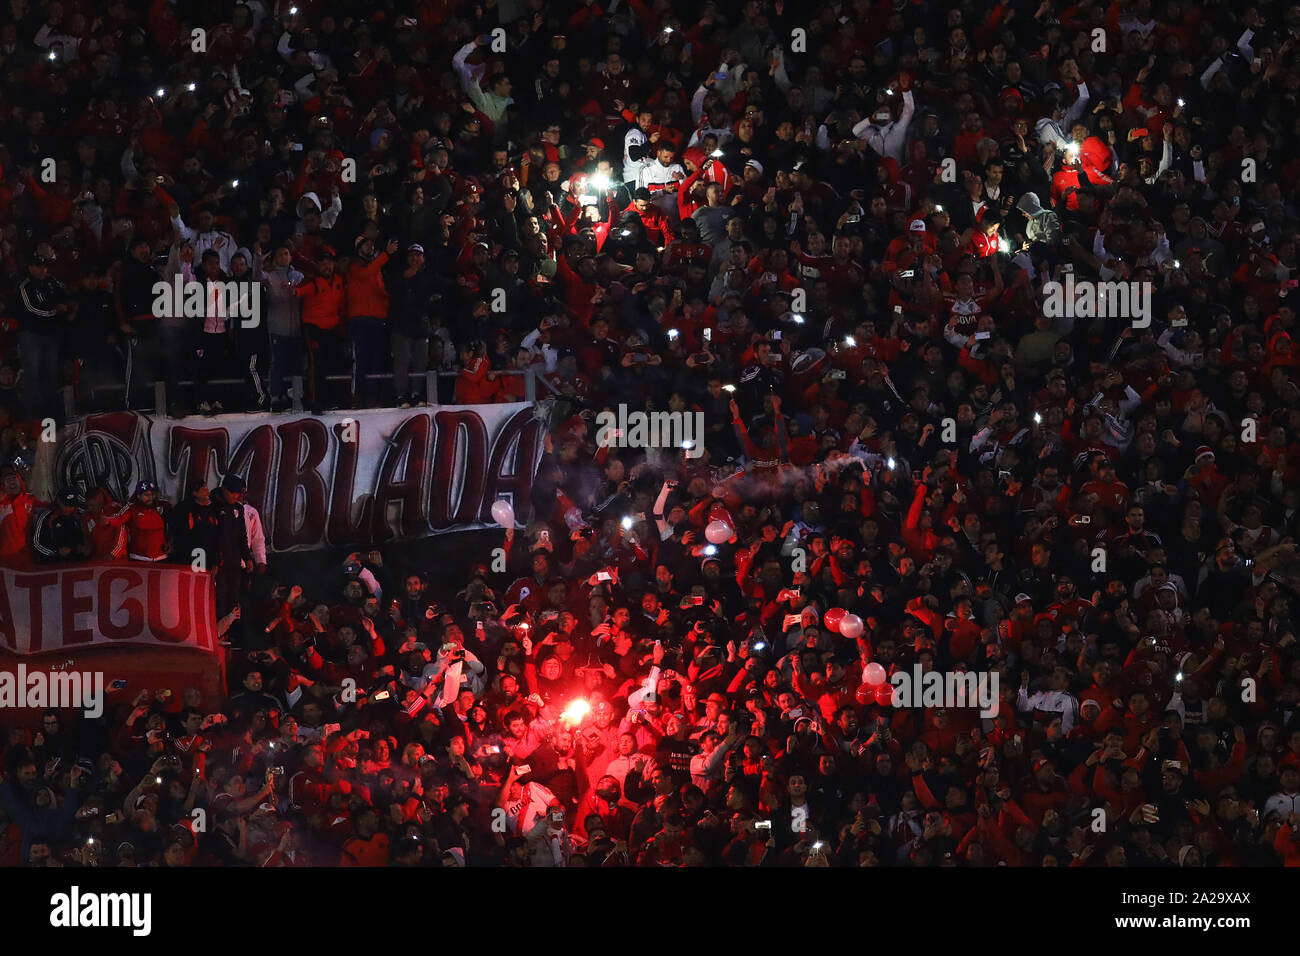 Buenos Aires, Argentina - Octobet 01, 2019: River Plate fans cheering the team in the match River - Boca for the libertadores cup 2019 in Buenos Aires Stock Photo